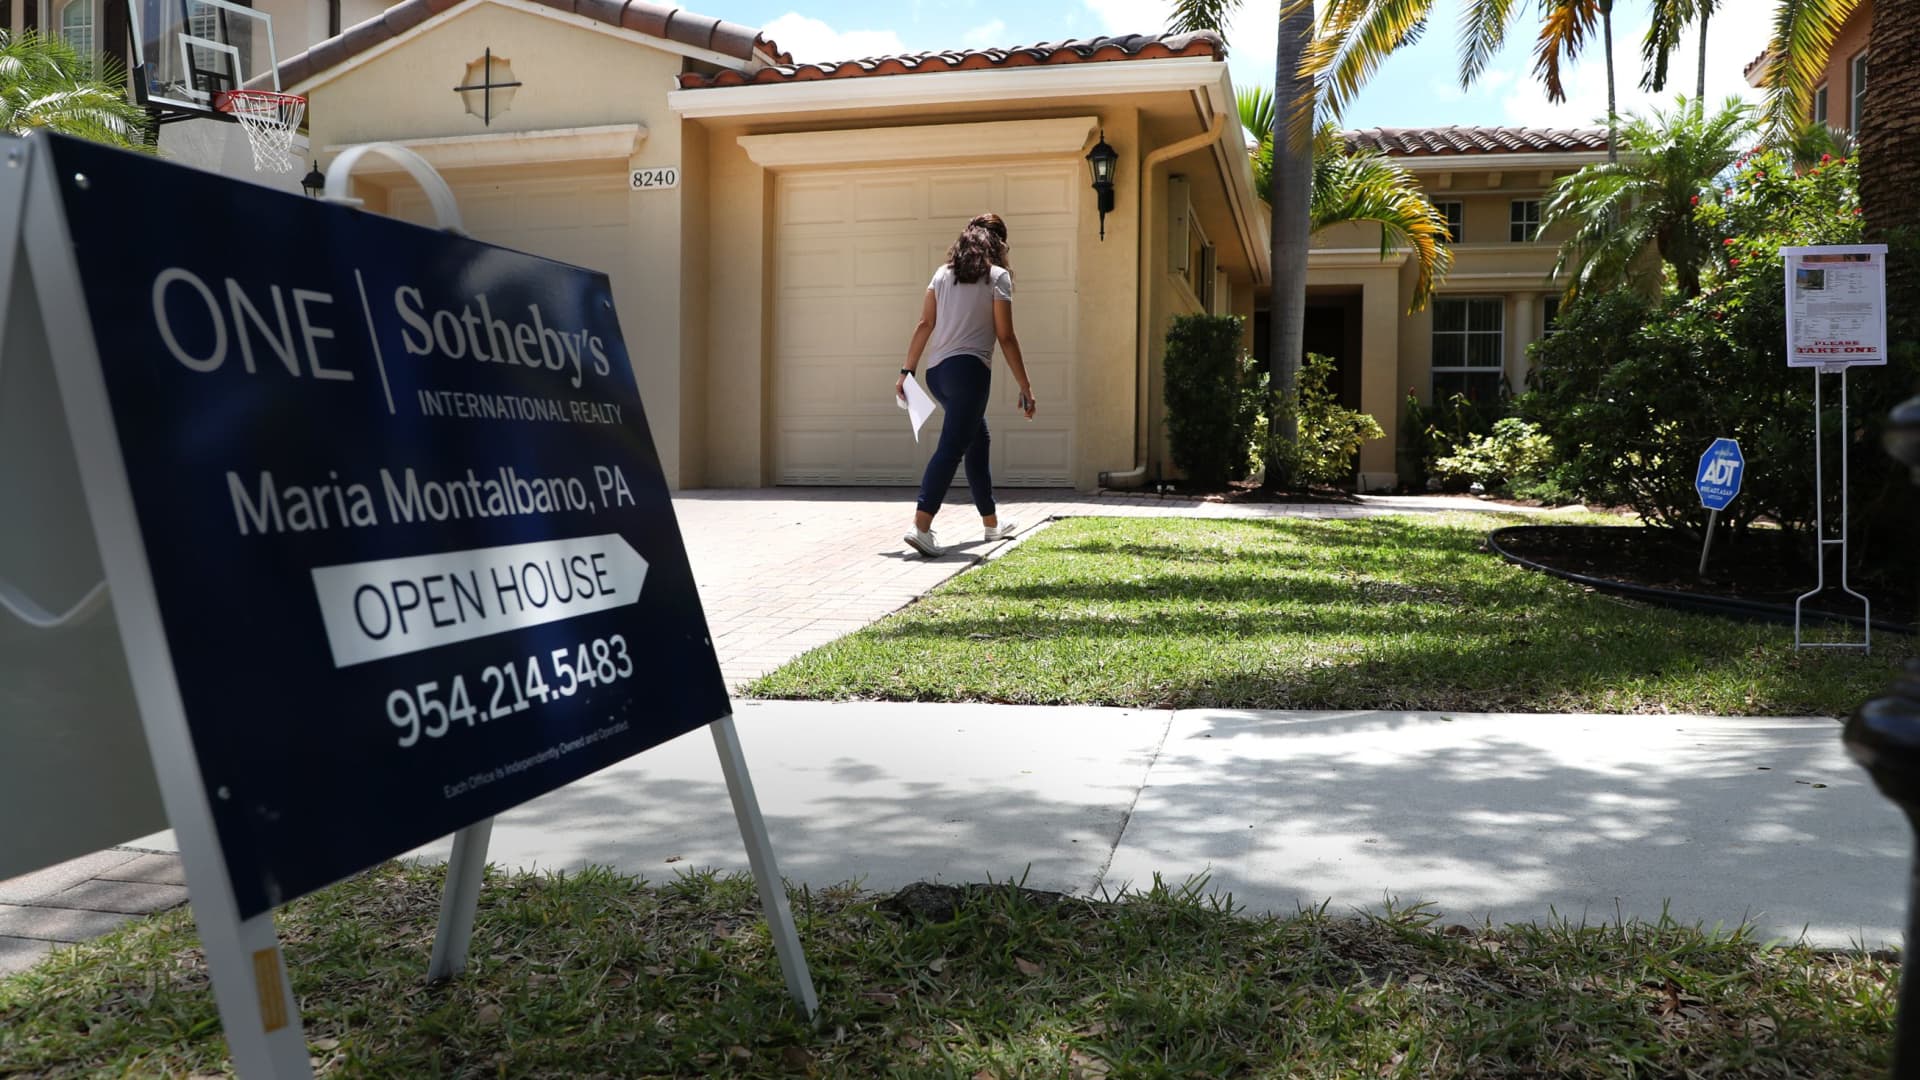 Home price declines may be over, S&P Case-Shiller says